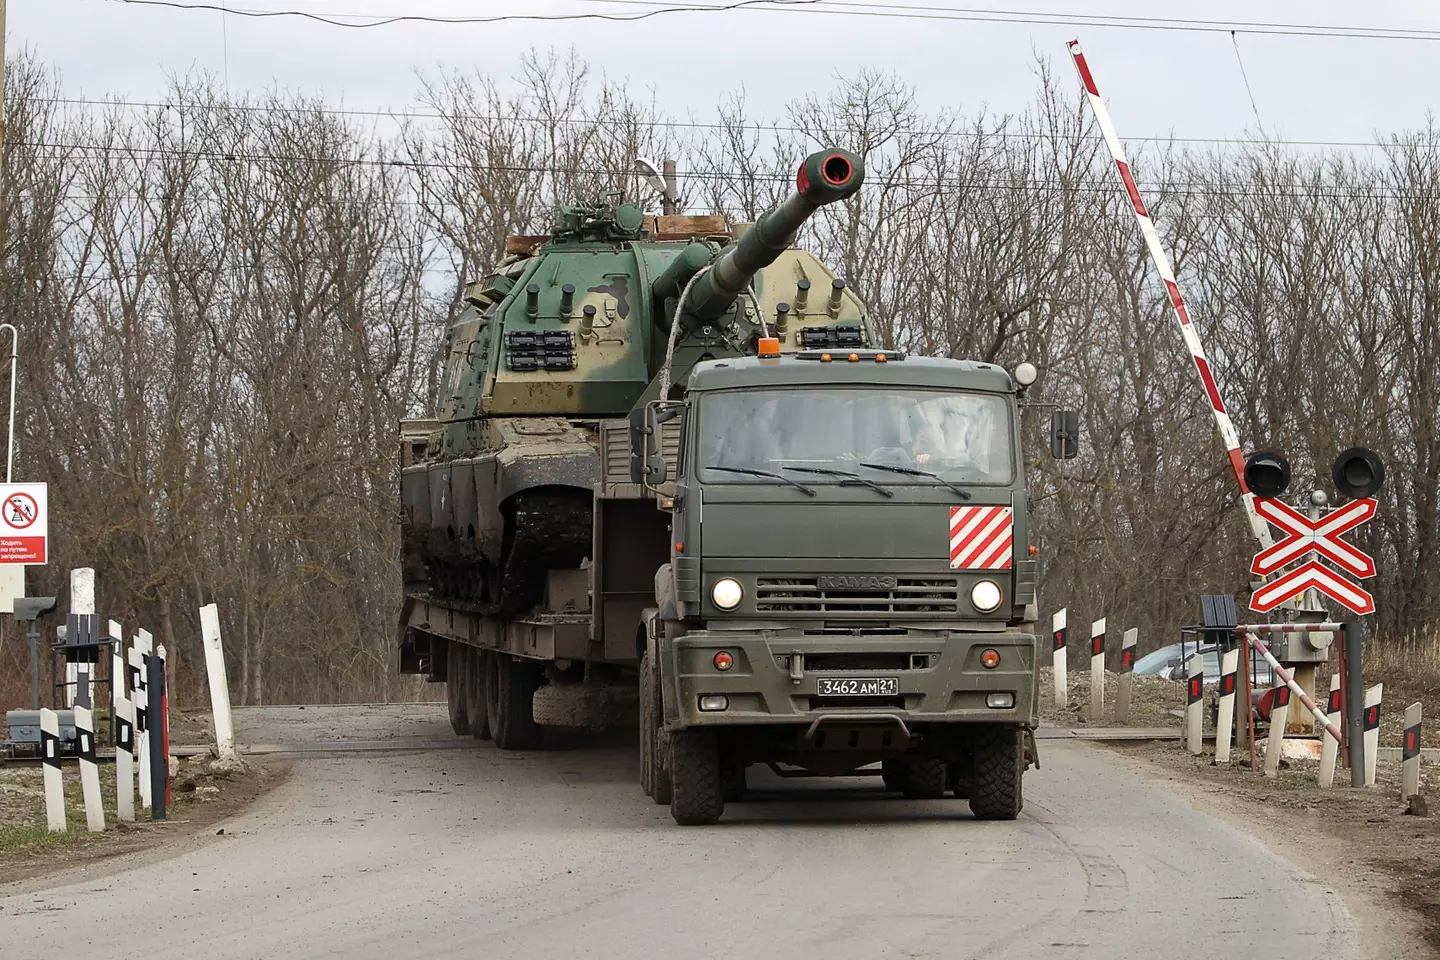 Russia has amassed a large military force on the border with Ukraine.